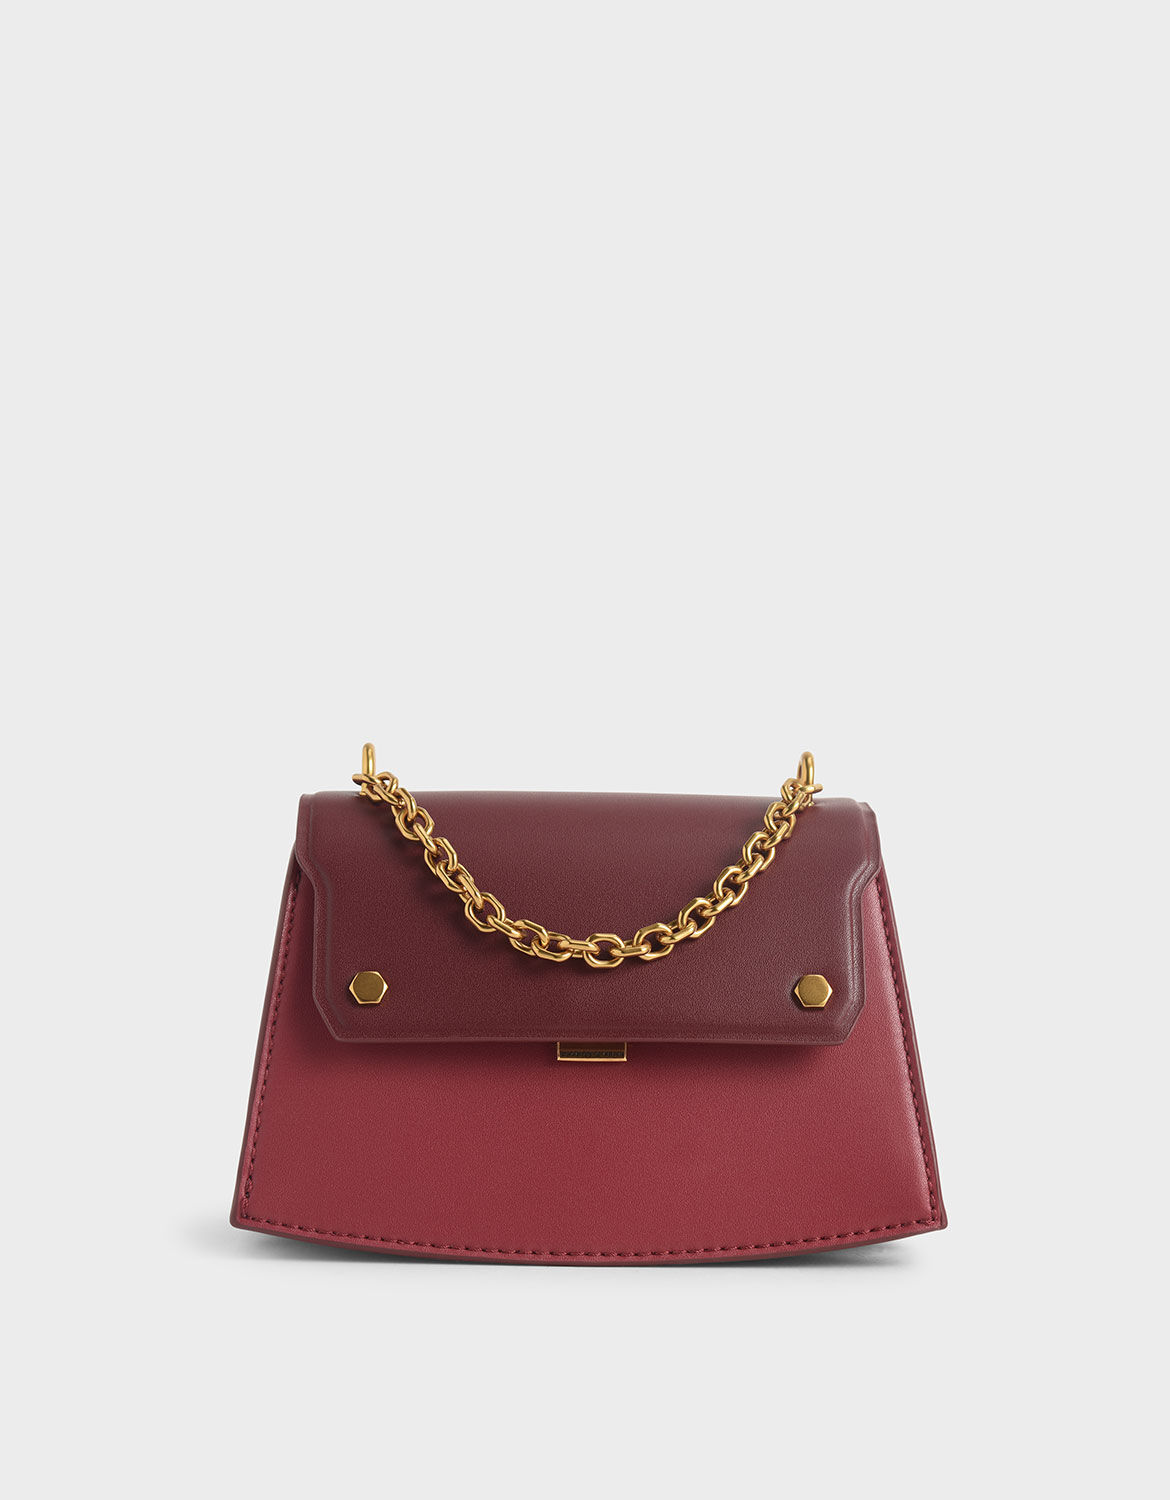 Shop Women’s Bags | Exclusive Styles | CHARLES & KEITH International